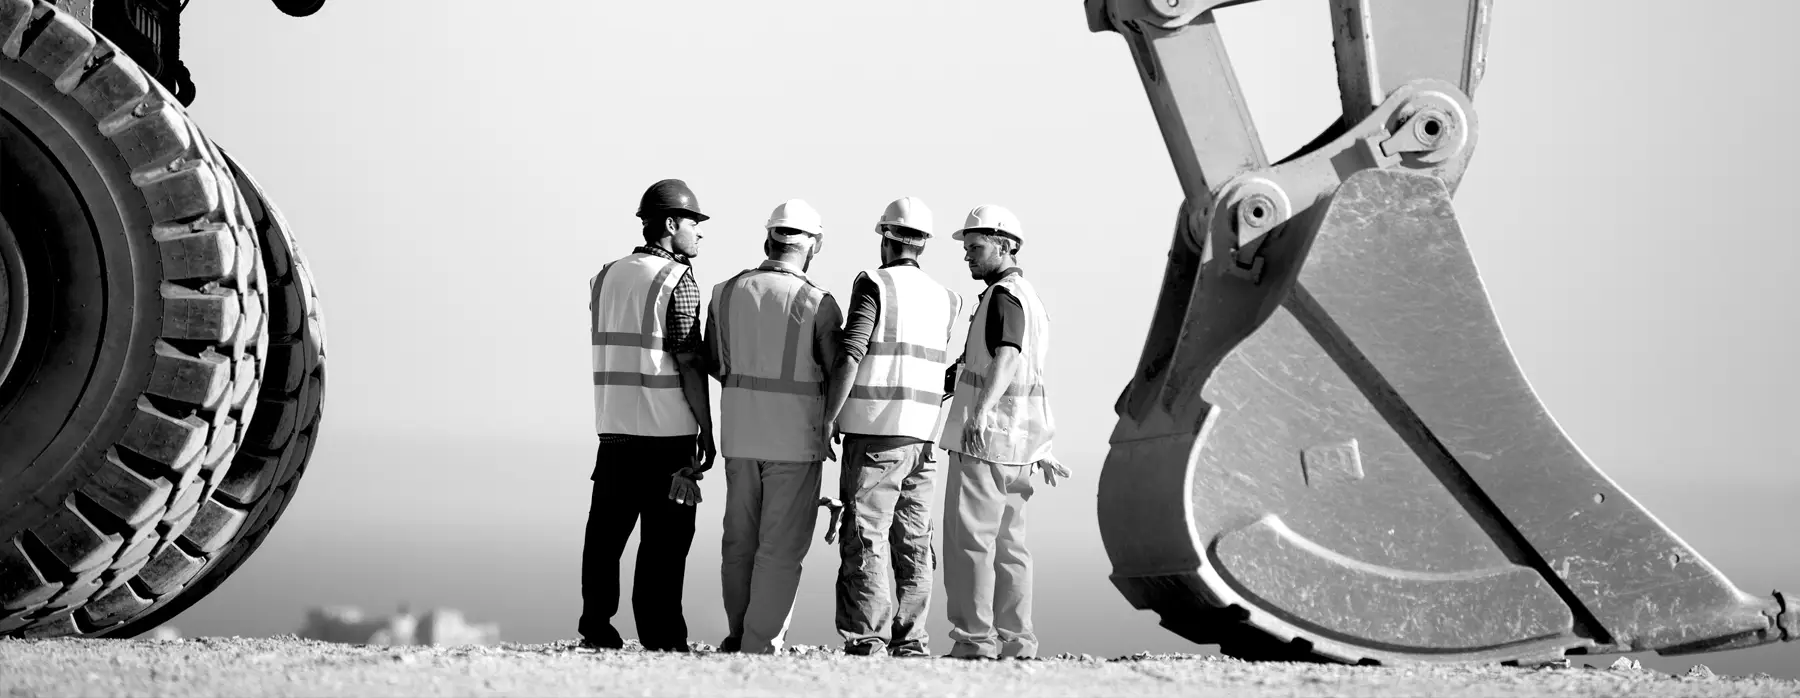 Four construction workers talking near heavy equipment